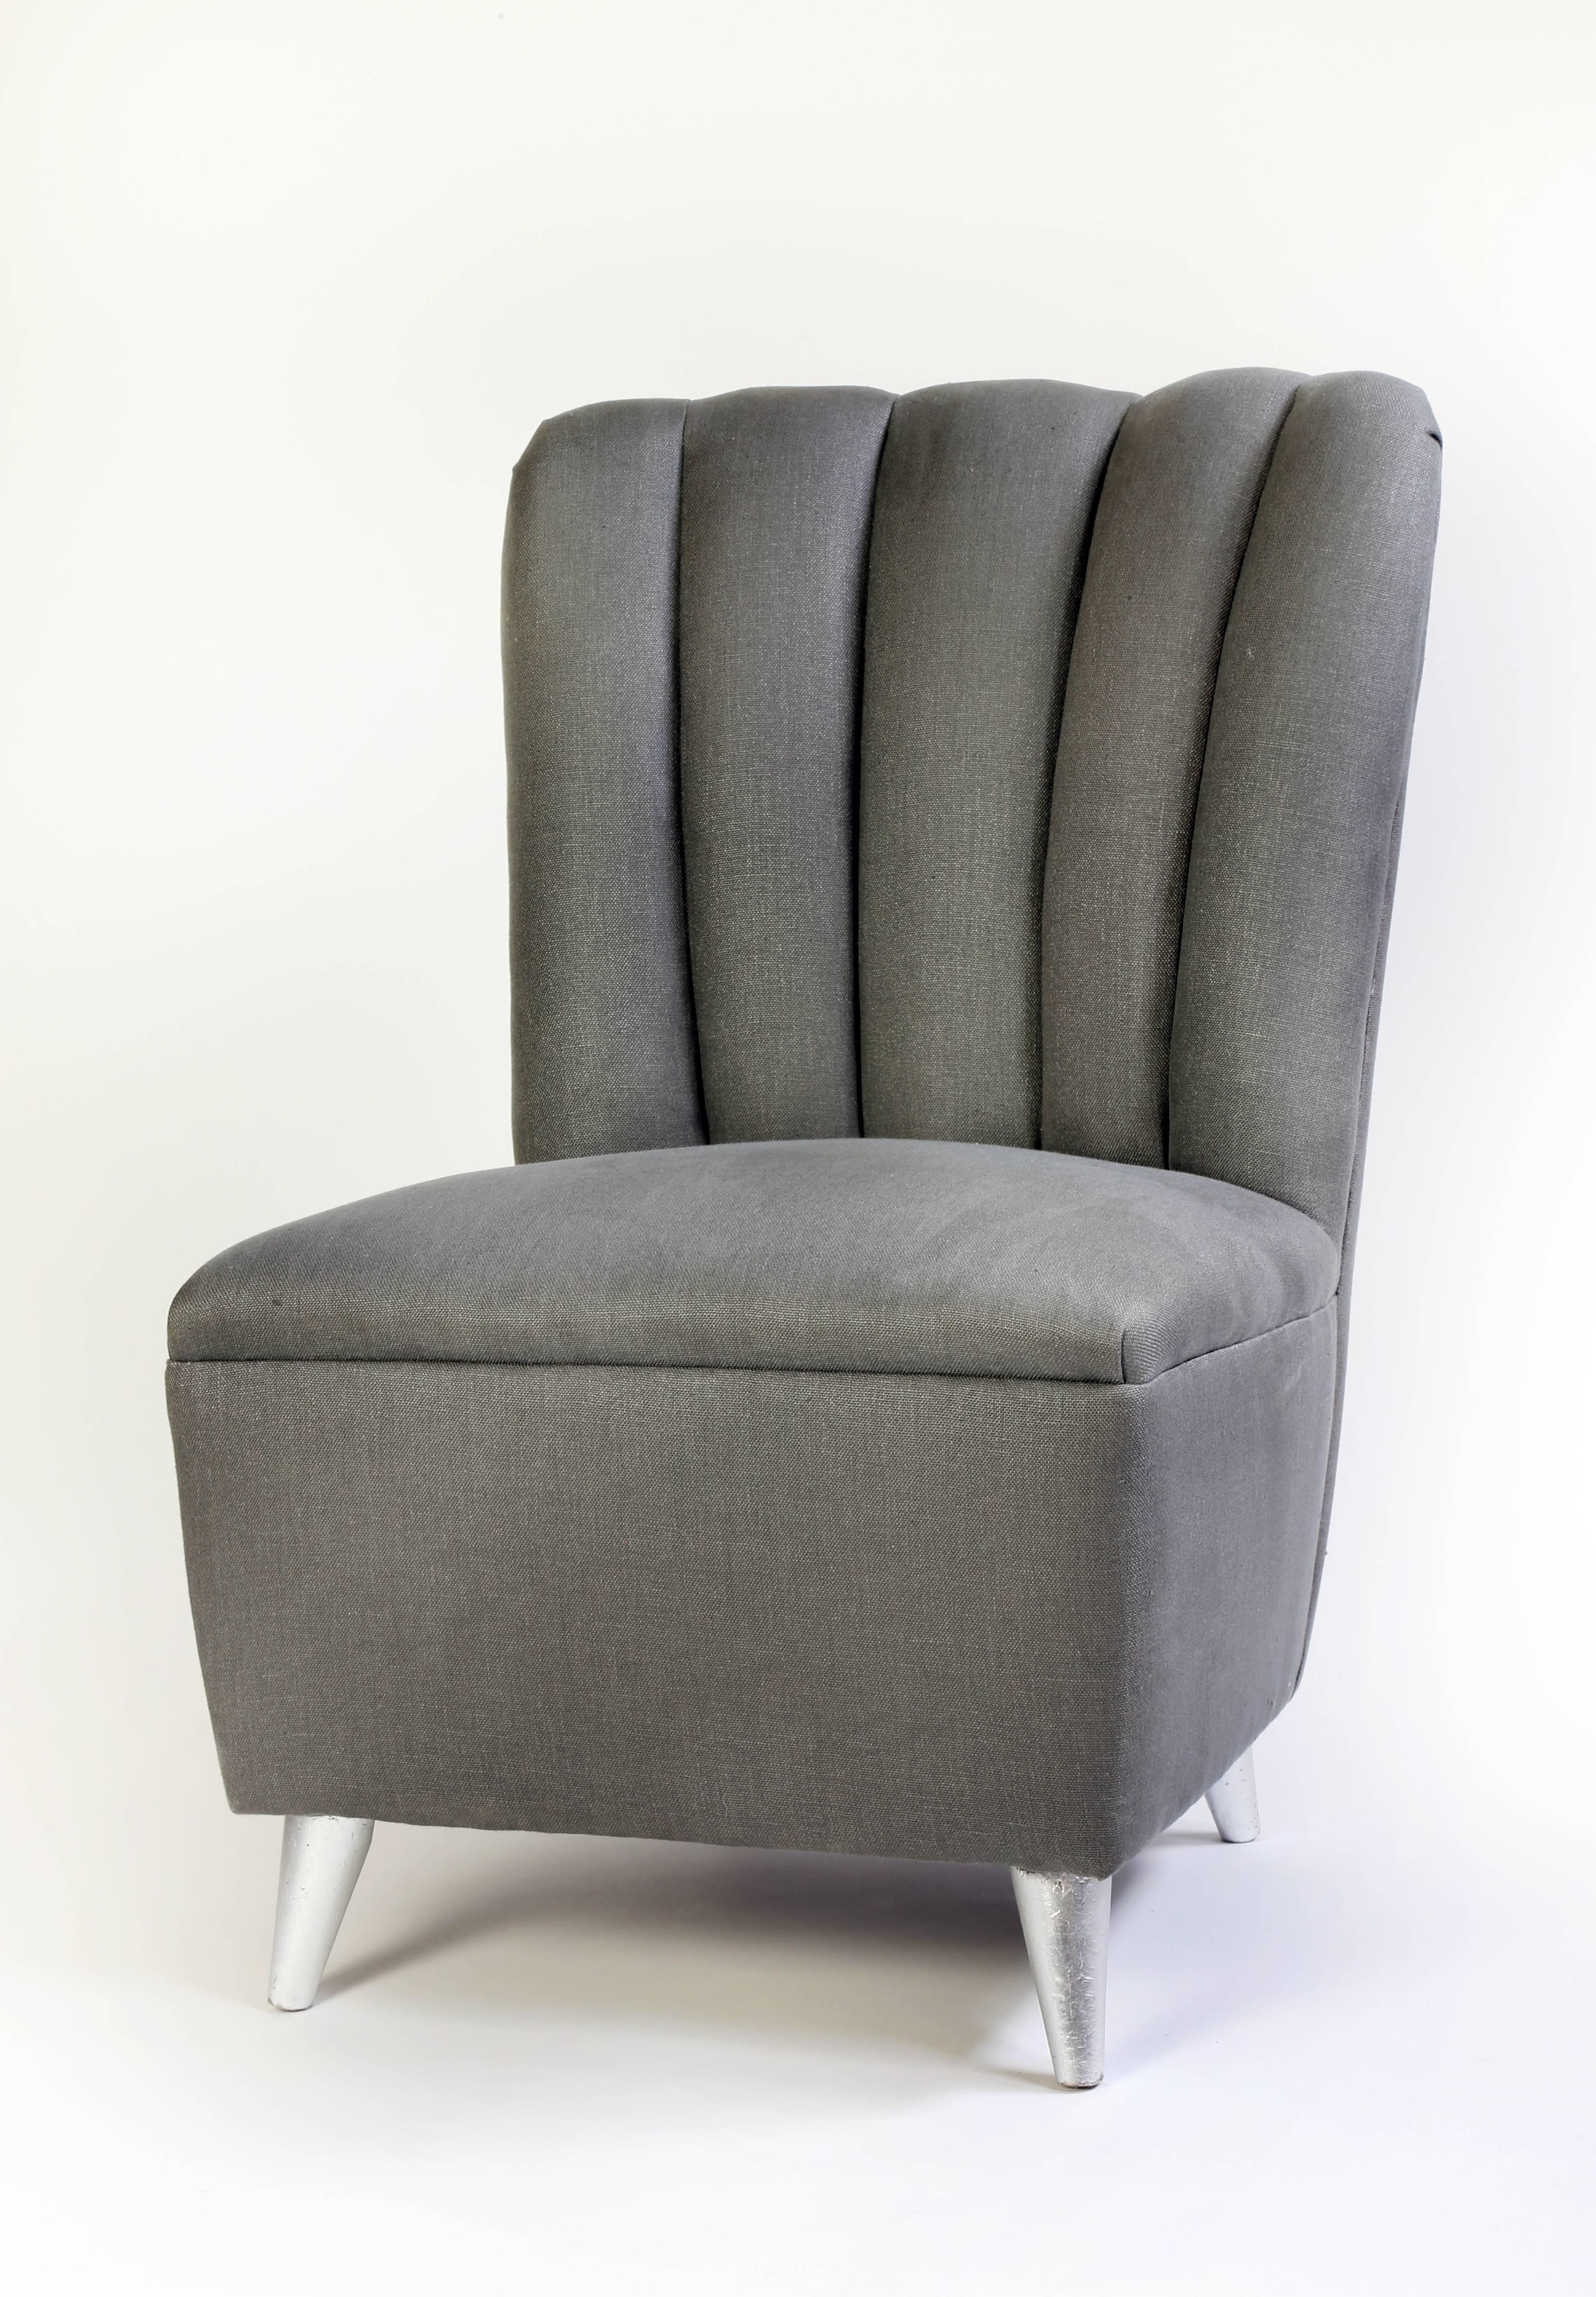 Italian Mid-Century Modern upholstered chairs, circa 1950, newly upholstered in charcoal linen, rising on four feet with silver leaf. Discoloration to fabric.